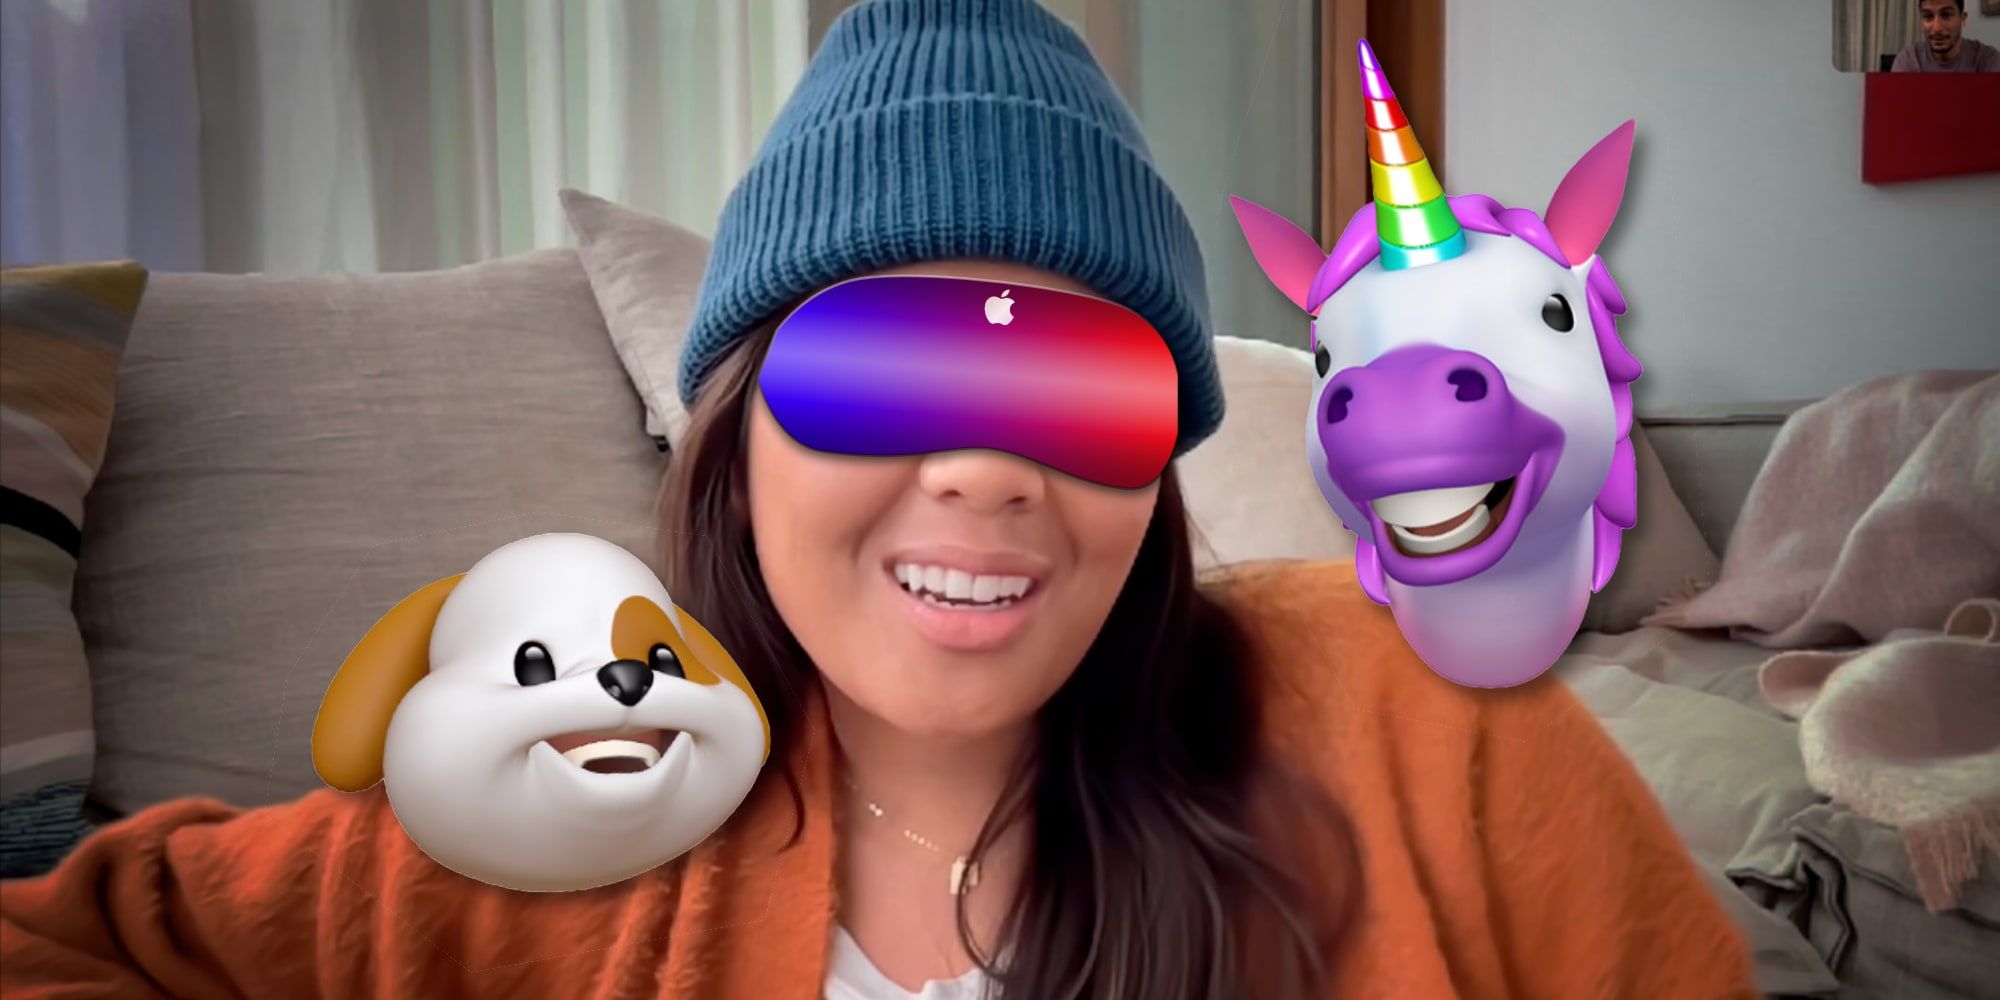 Apples Animoji Could Be Headed To VR Via FaceTime